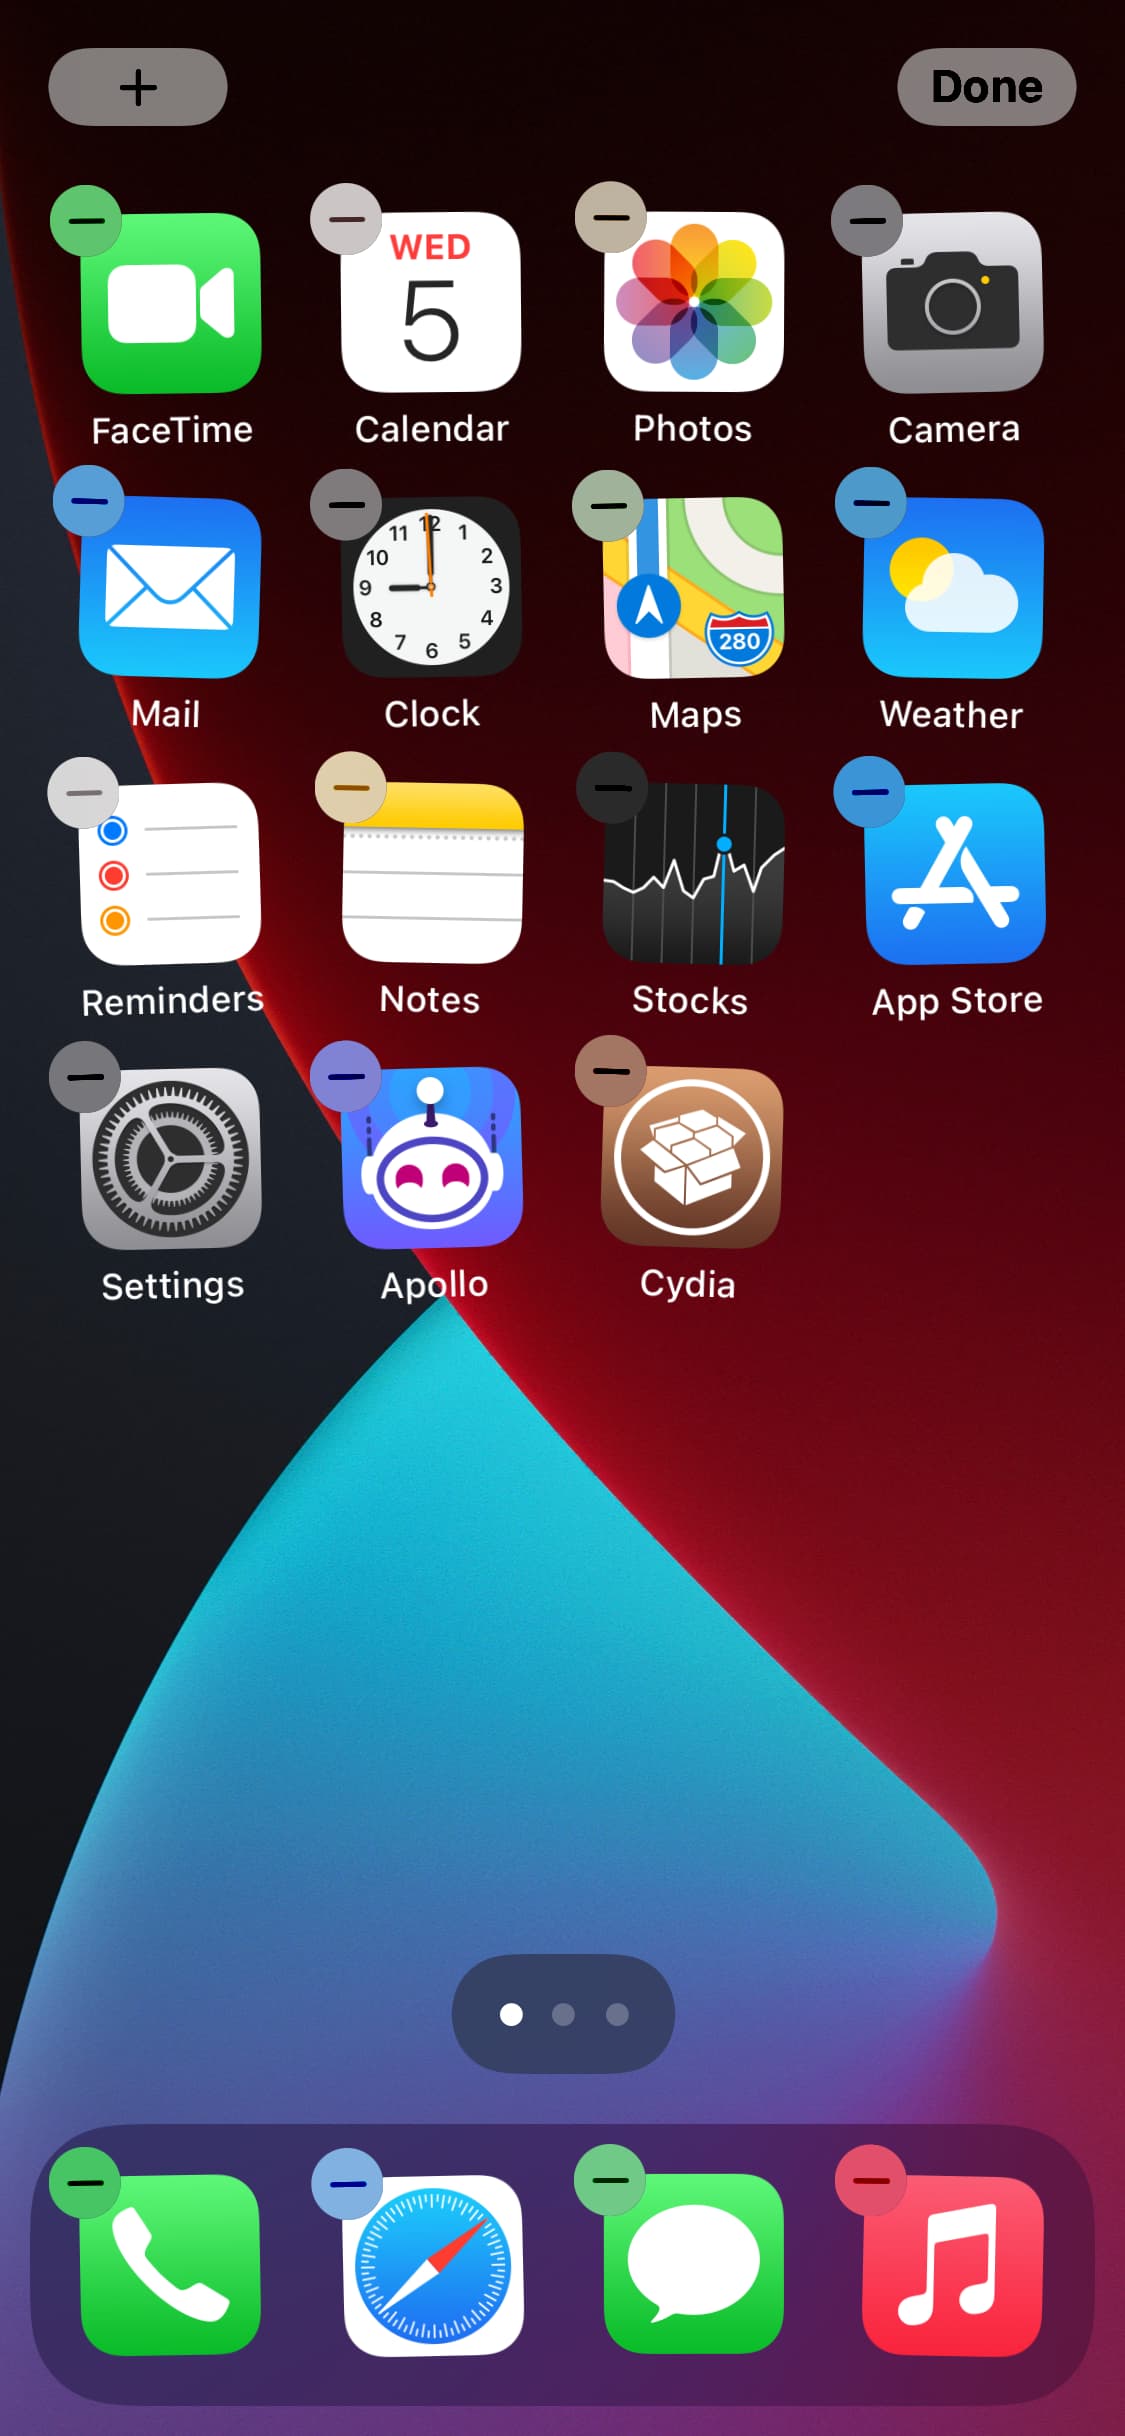 This new jailbreak tweak colorizes Home Screen’s app delete buttons based on the dominant color